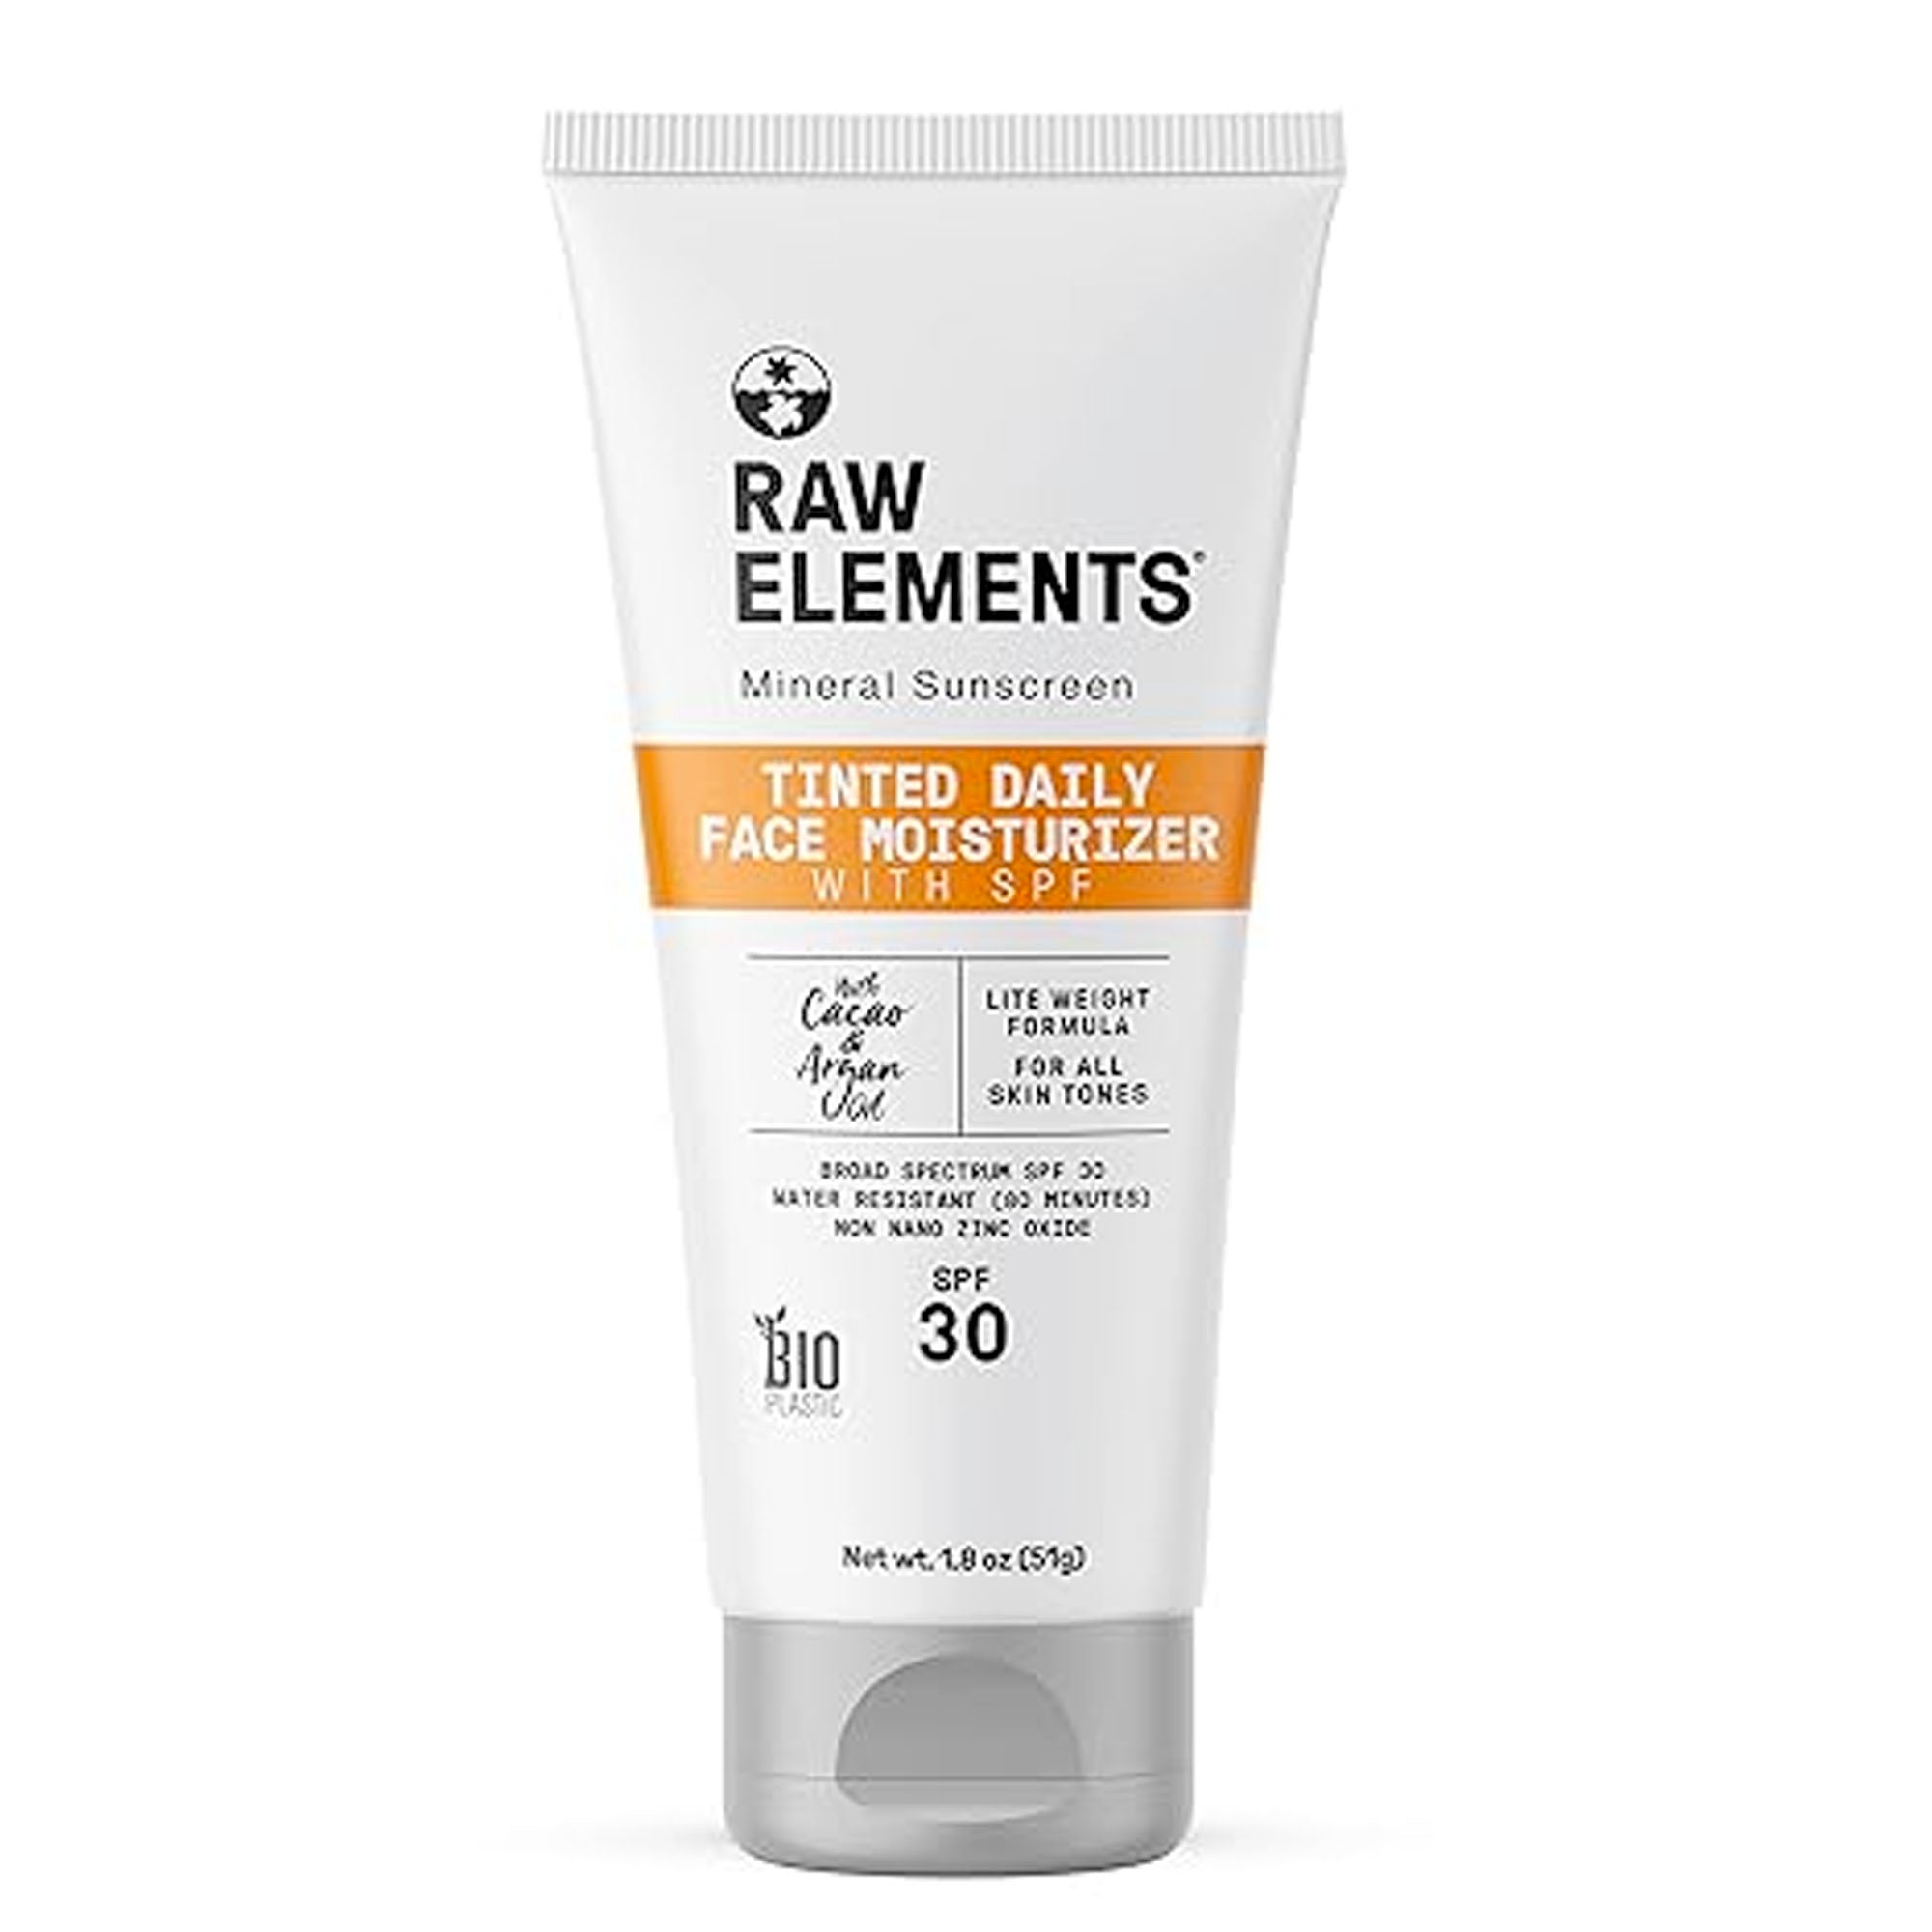 Raw Elements Tinted Daily Face Moisturizer SPF 30 Sunscreen Lotion